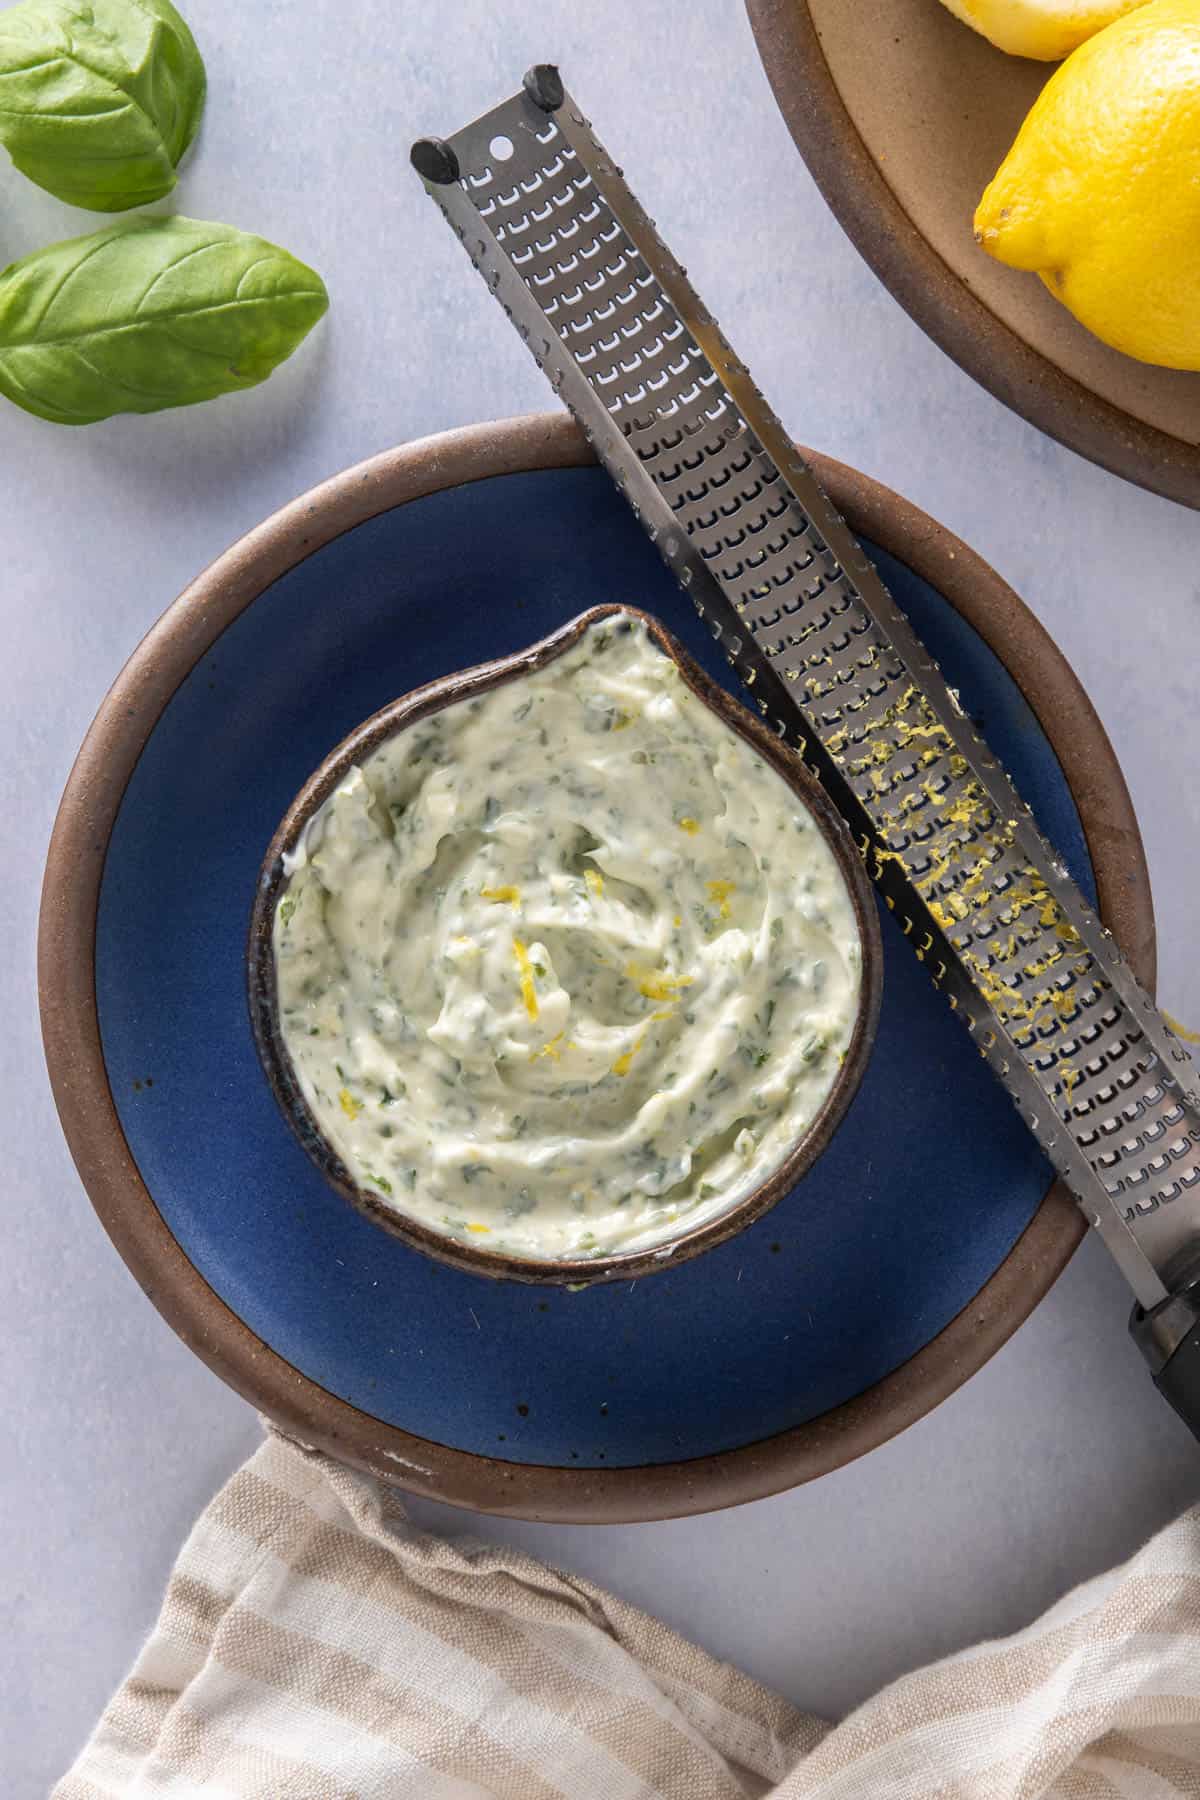 Basil aioli in a jar, on a blue plate, with a microplane with lemon zest resting on it. Basil, lemons in background